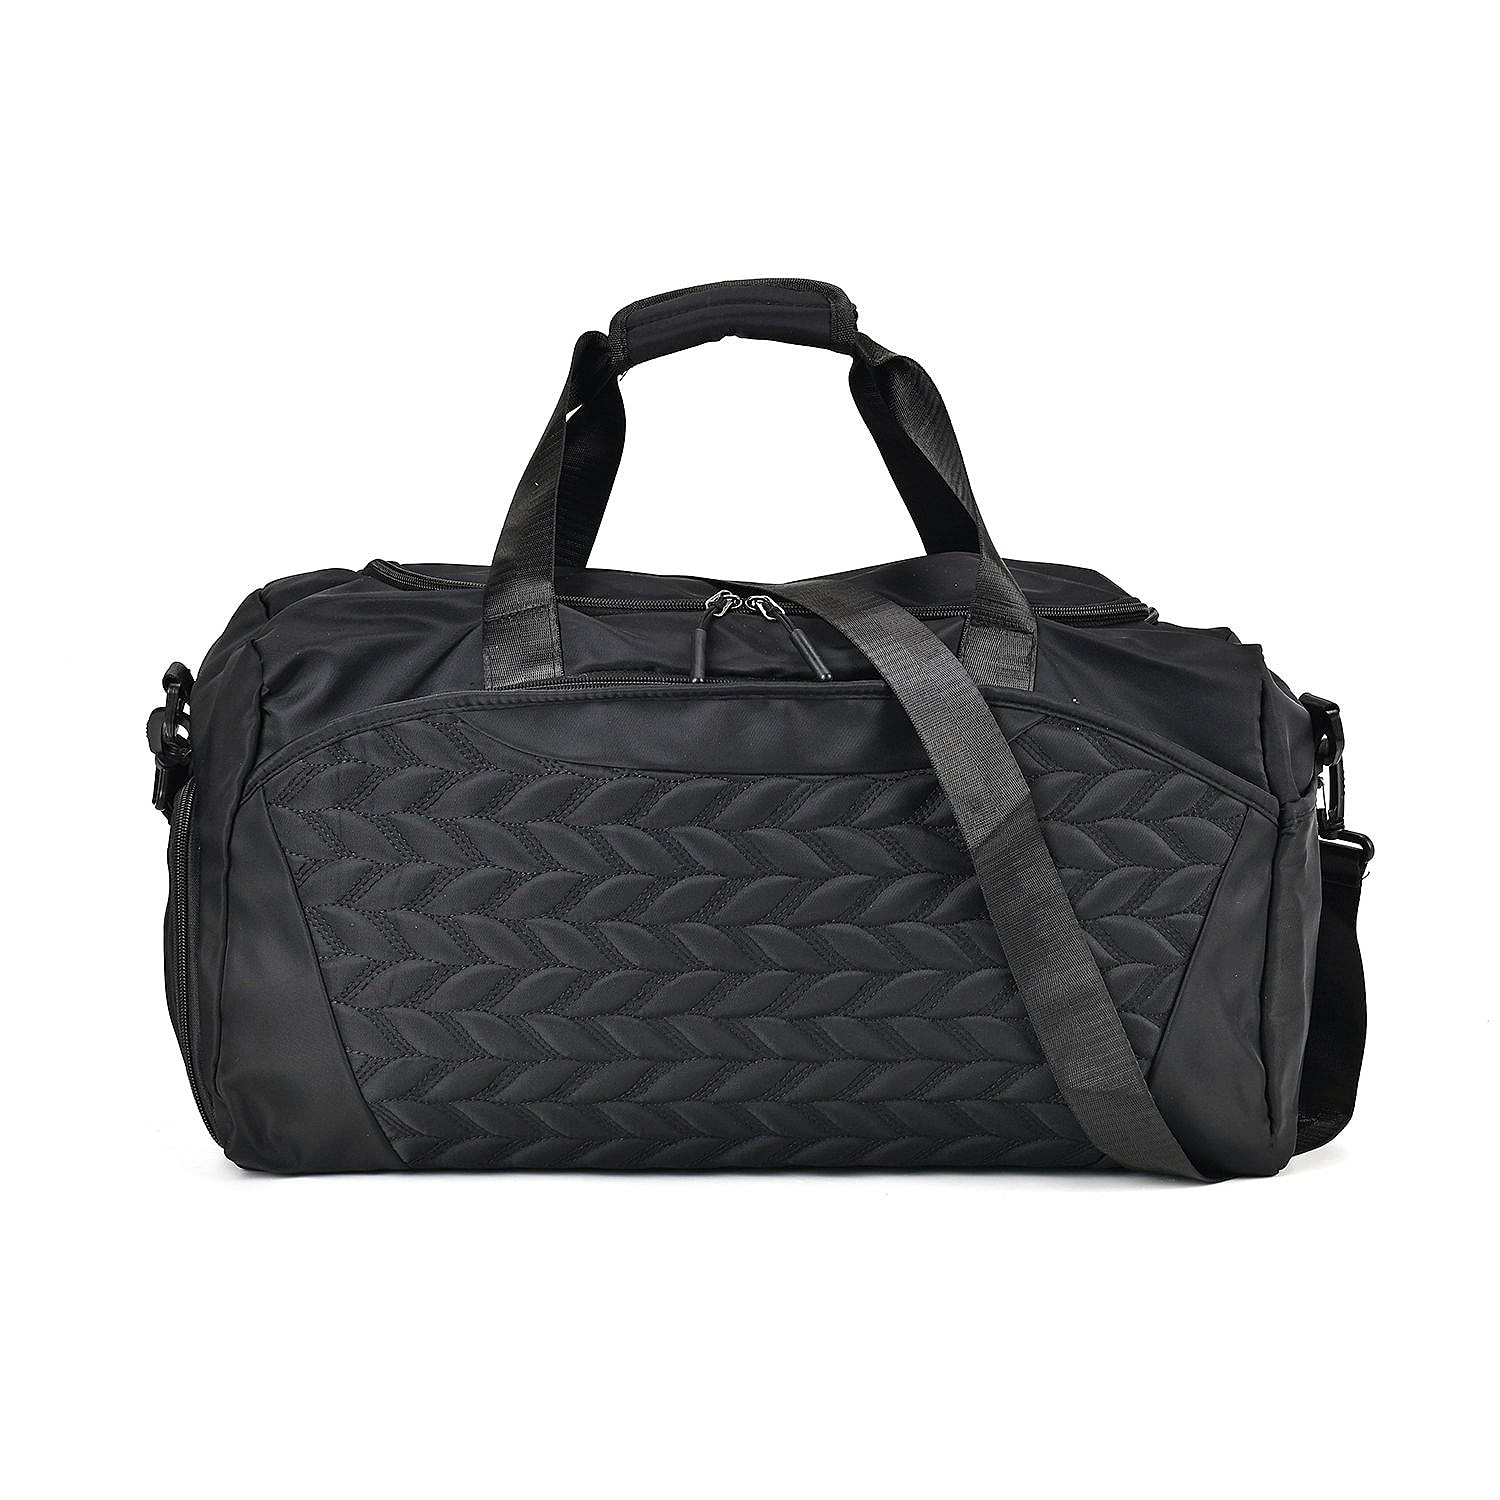 Travel Duffle Bag with Quilted Leaves Pattern - Black